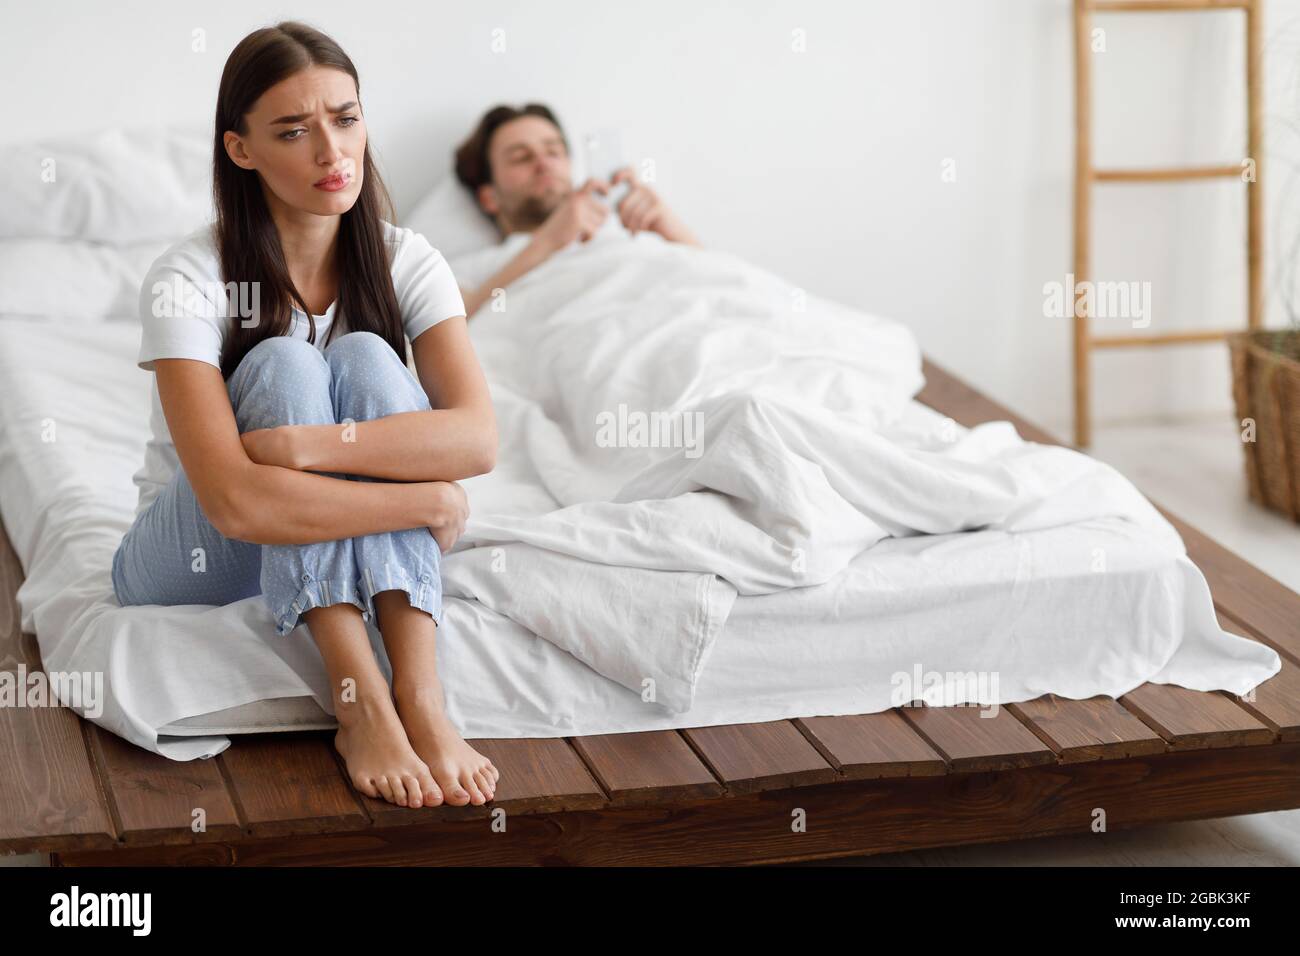 Unhappy Girlfriend Sitting While Cheating Husband Texting On Phone Indoor Stock Photo